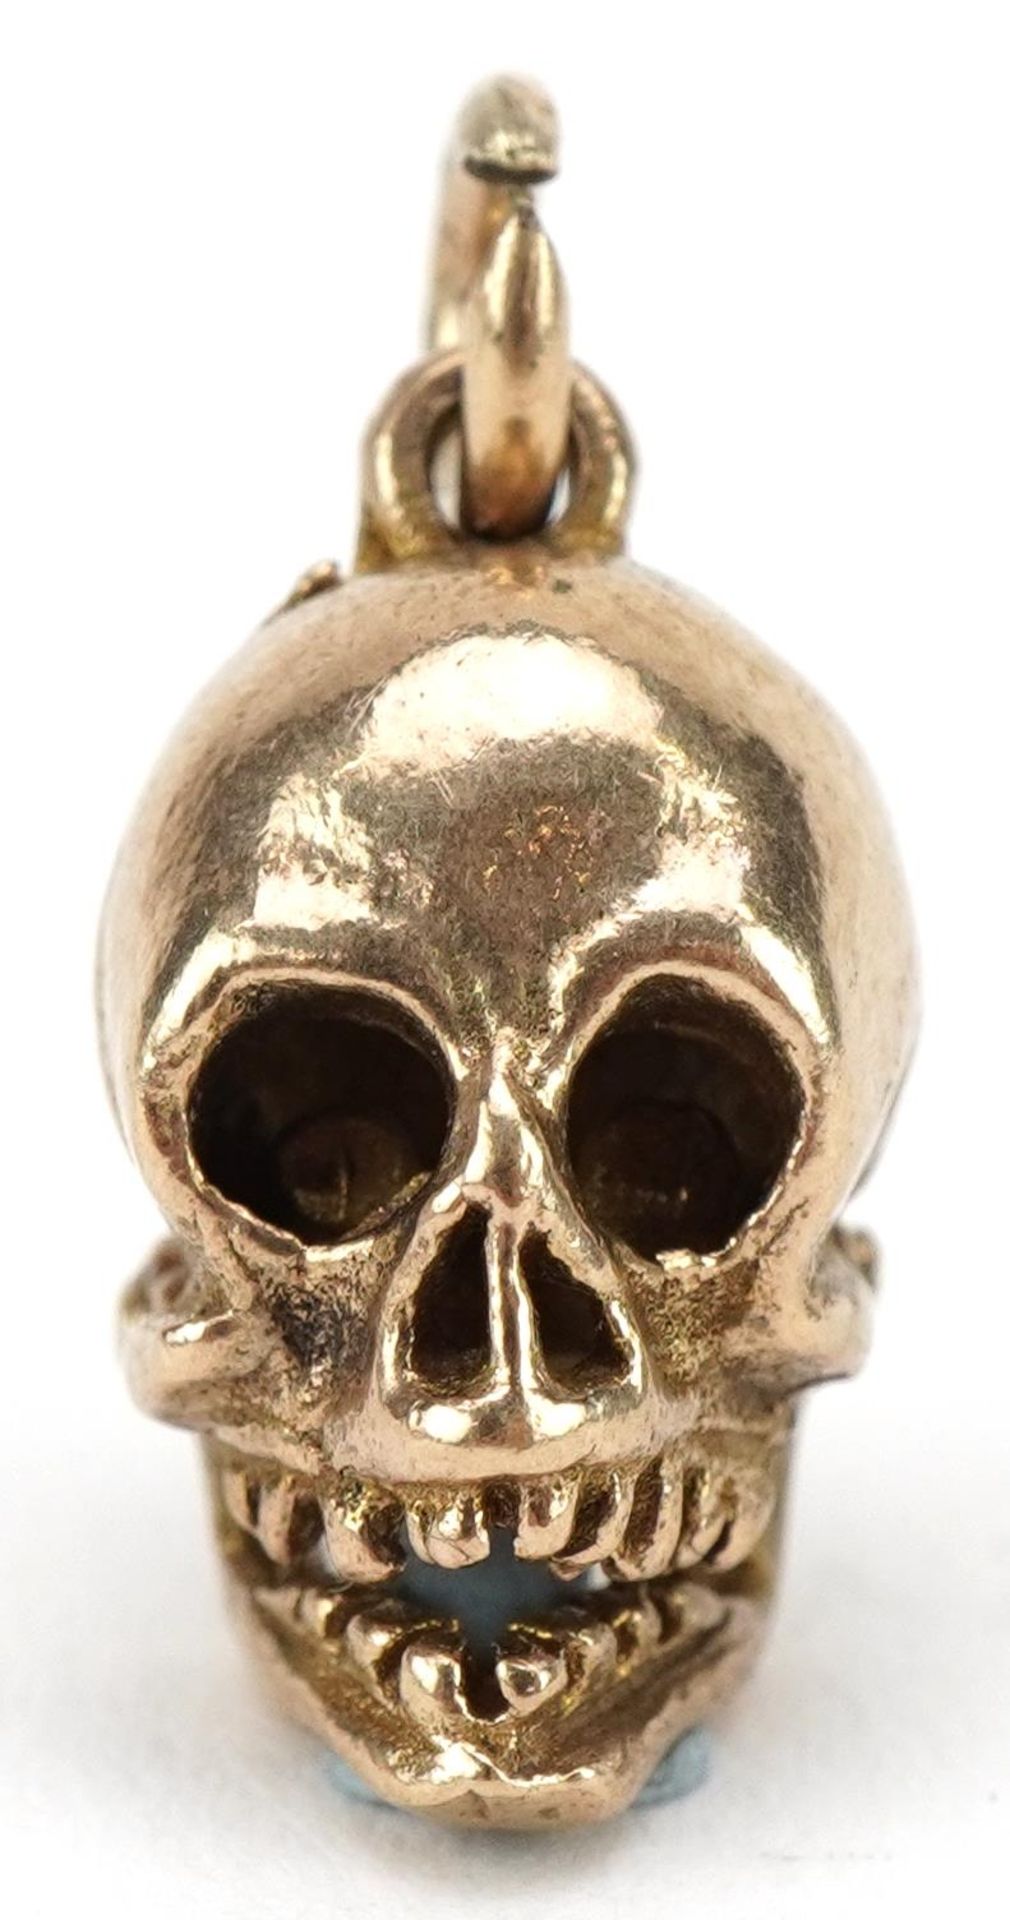 9ct gold human skull charm with articulated jaw, 1.5cm high, 3.2g : For further information on